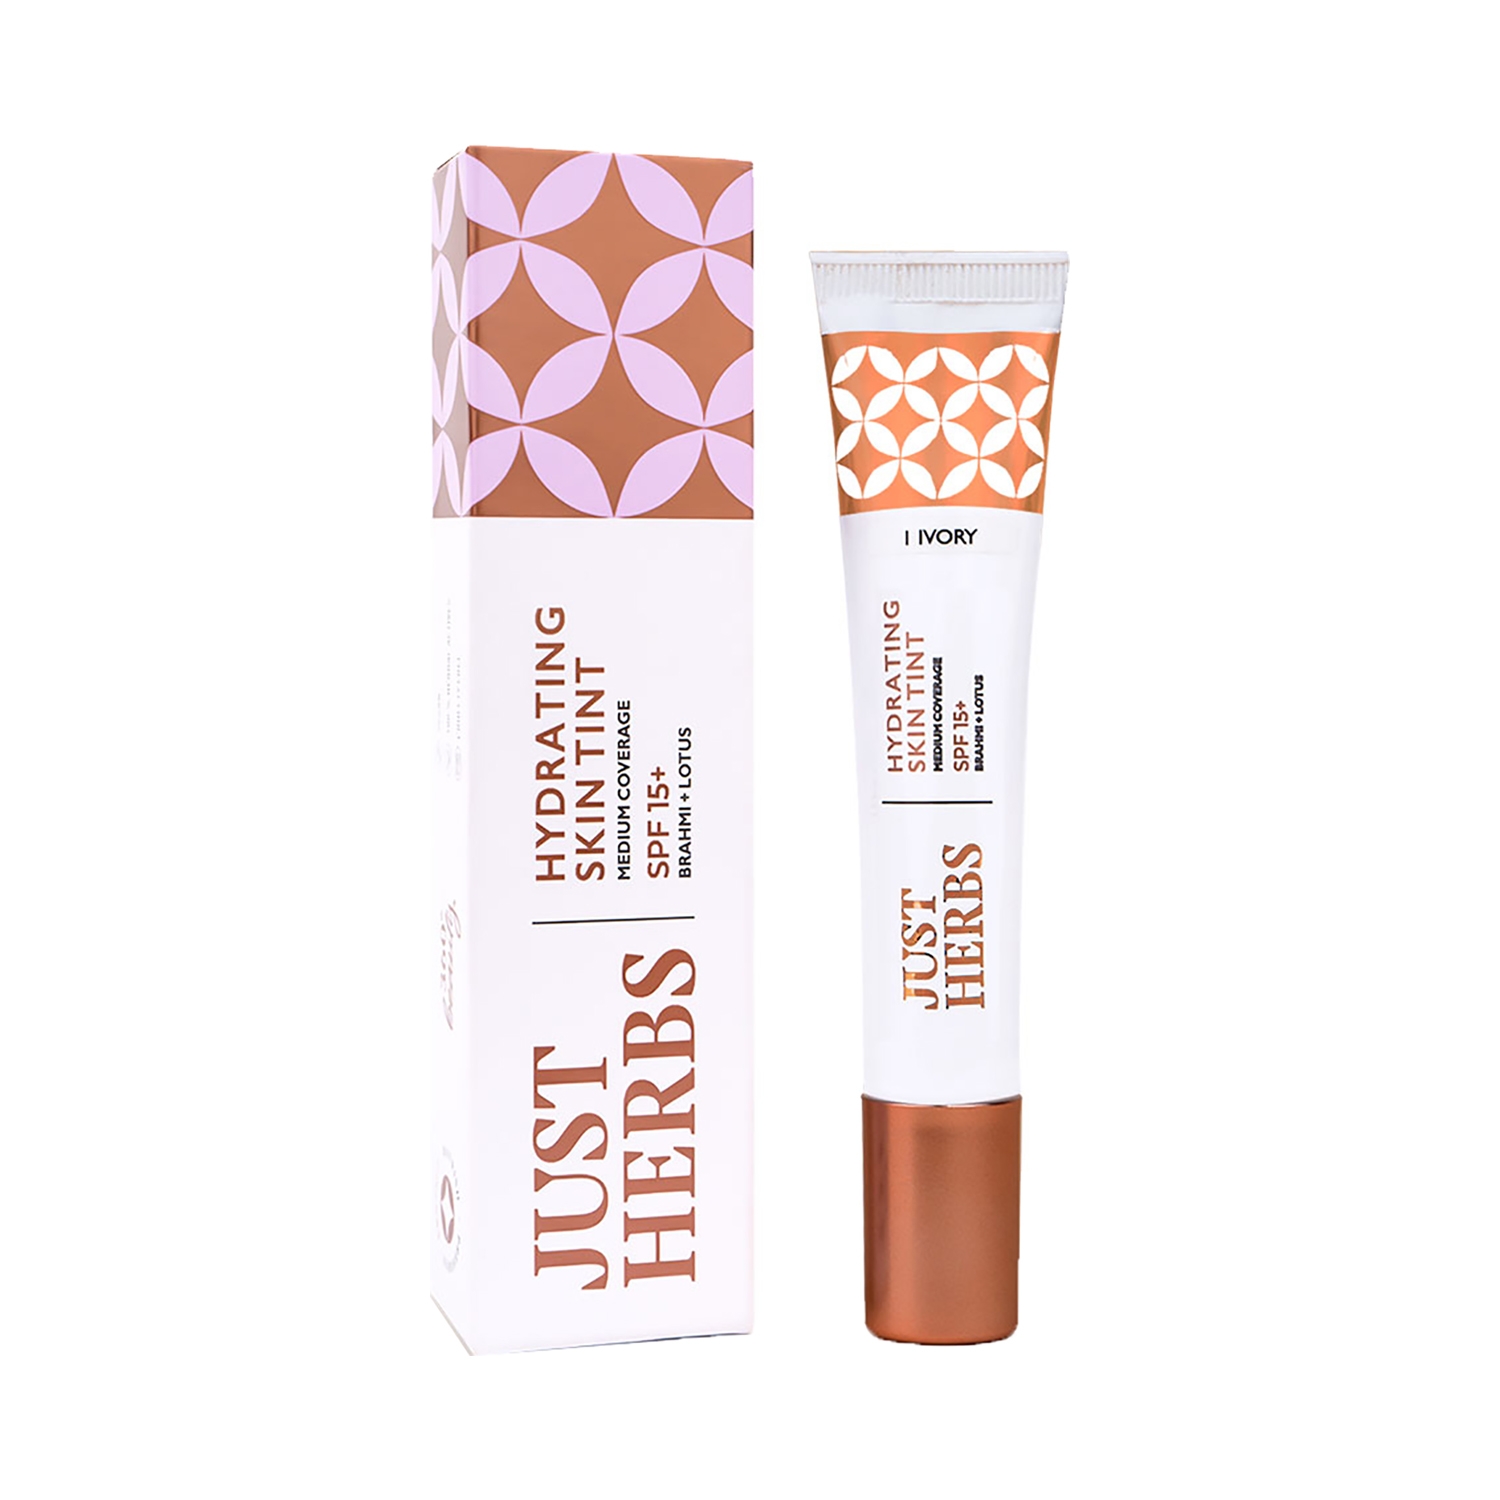 Just Herbs Enriched Hydrating Skin Tint SPF 15+ - 01 Ivory (20g)